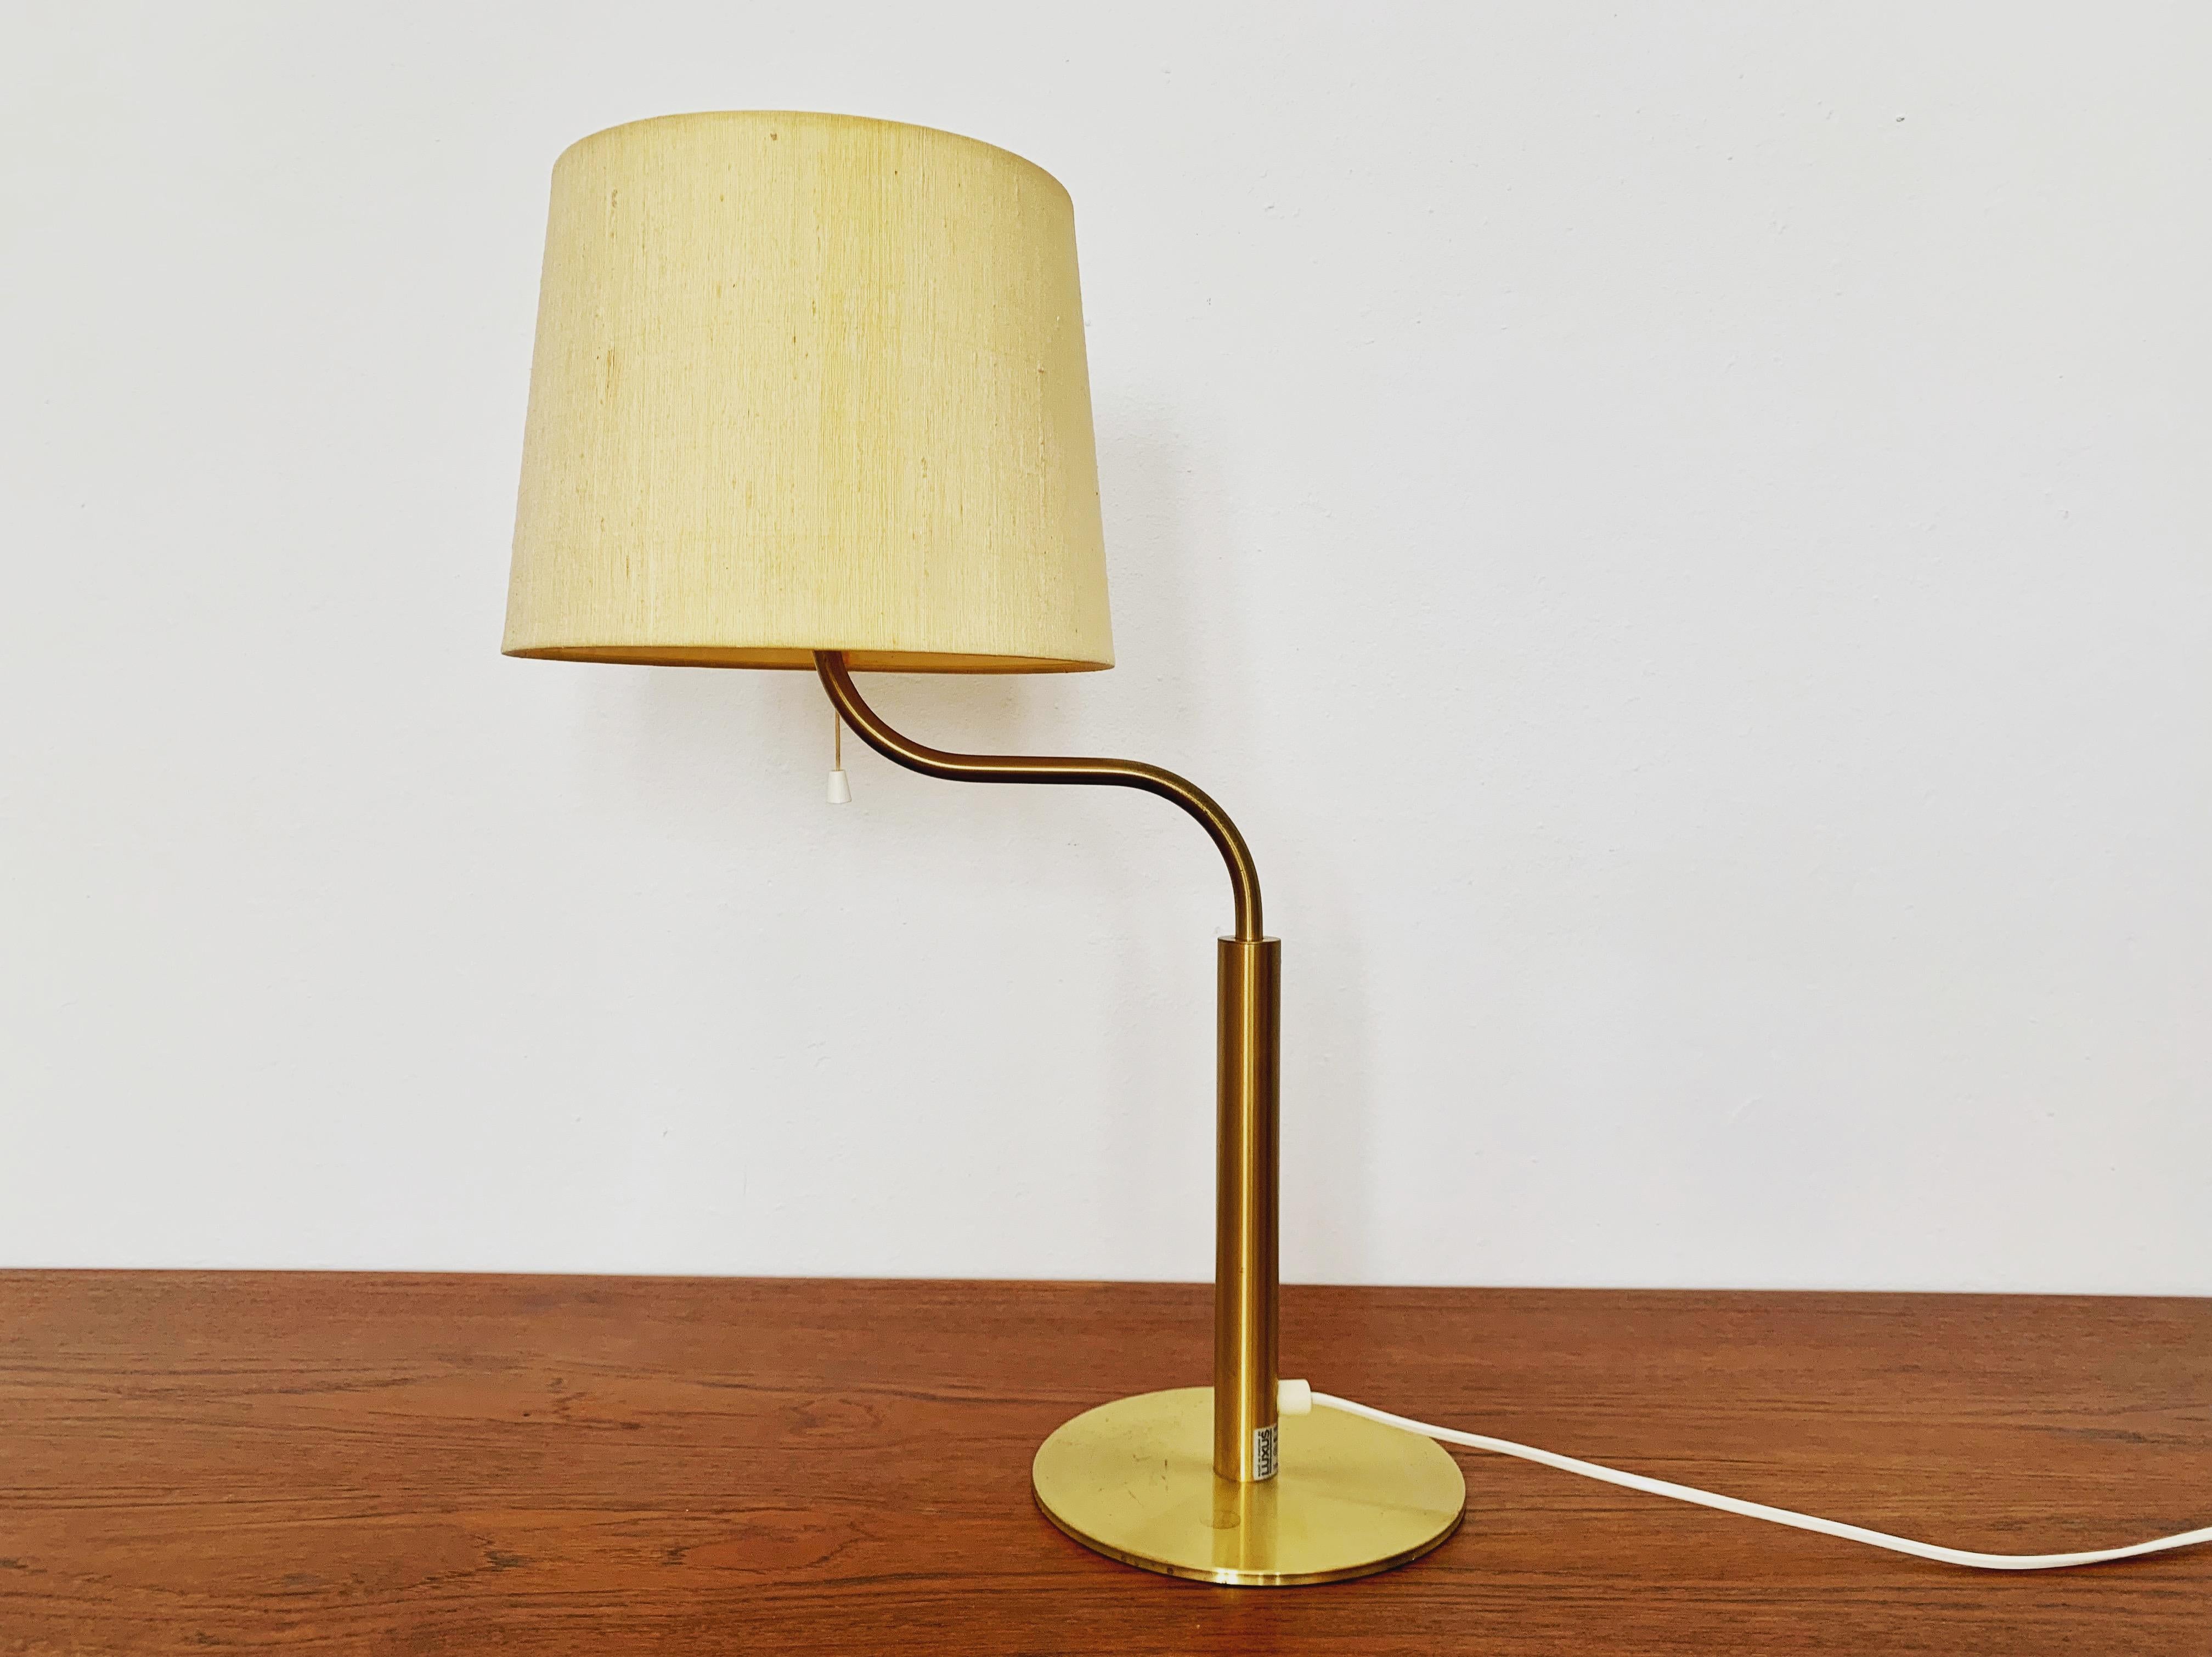 Extremely rare and beautiful Swedish table lamp from the 1960s.
Great and unusual design with a fantastically elegant appearance.

Manufacturer: Luxus
Design: Uno and Östen Kristiansson

Condition:

Very good vintage condition with slight